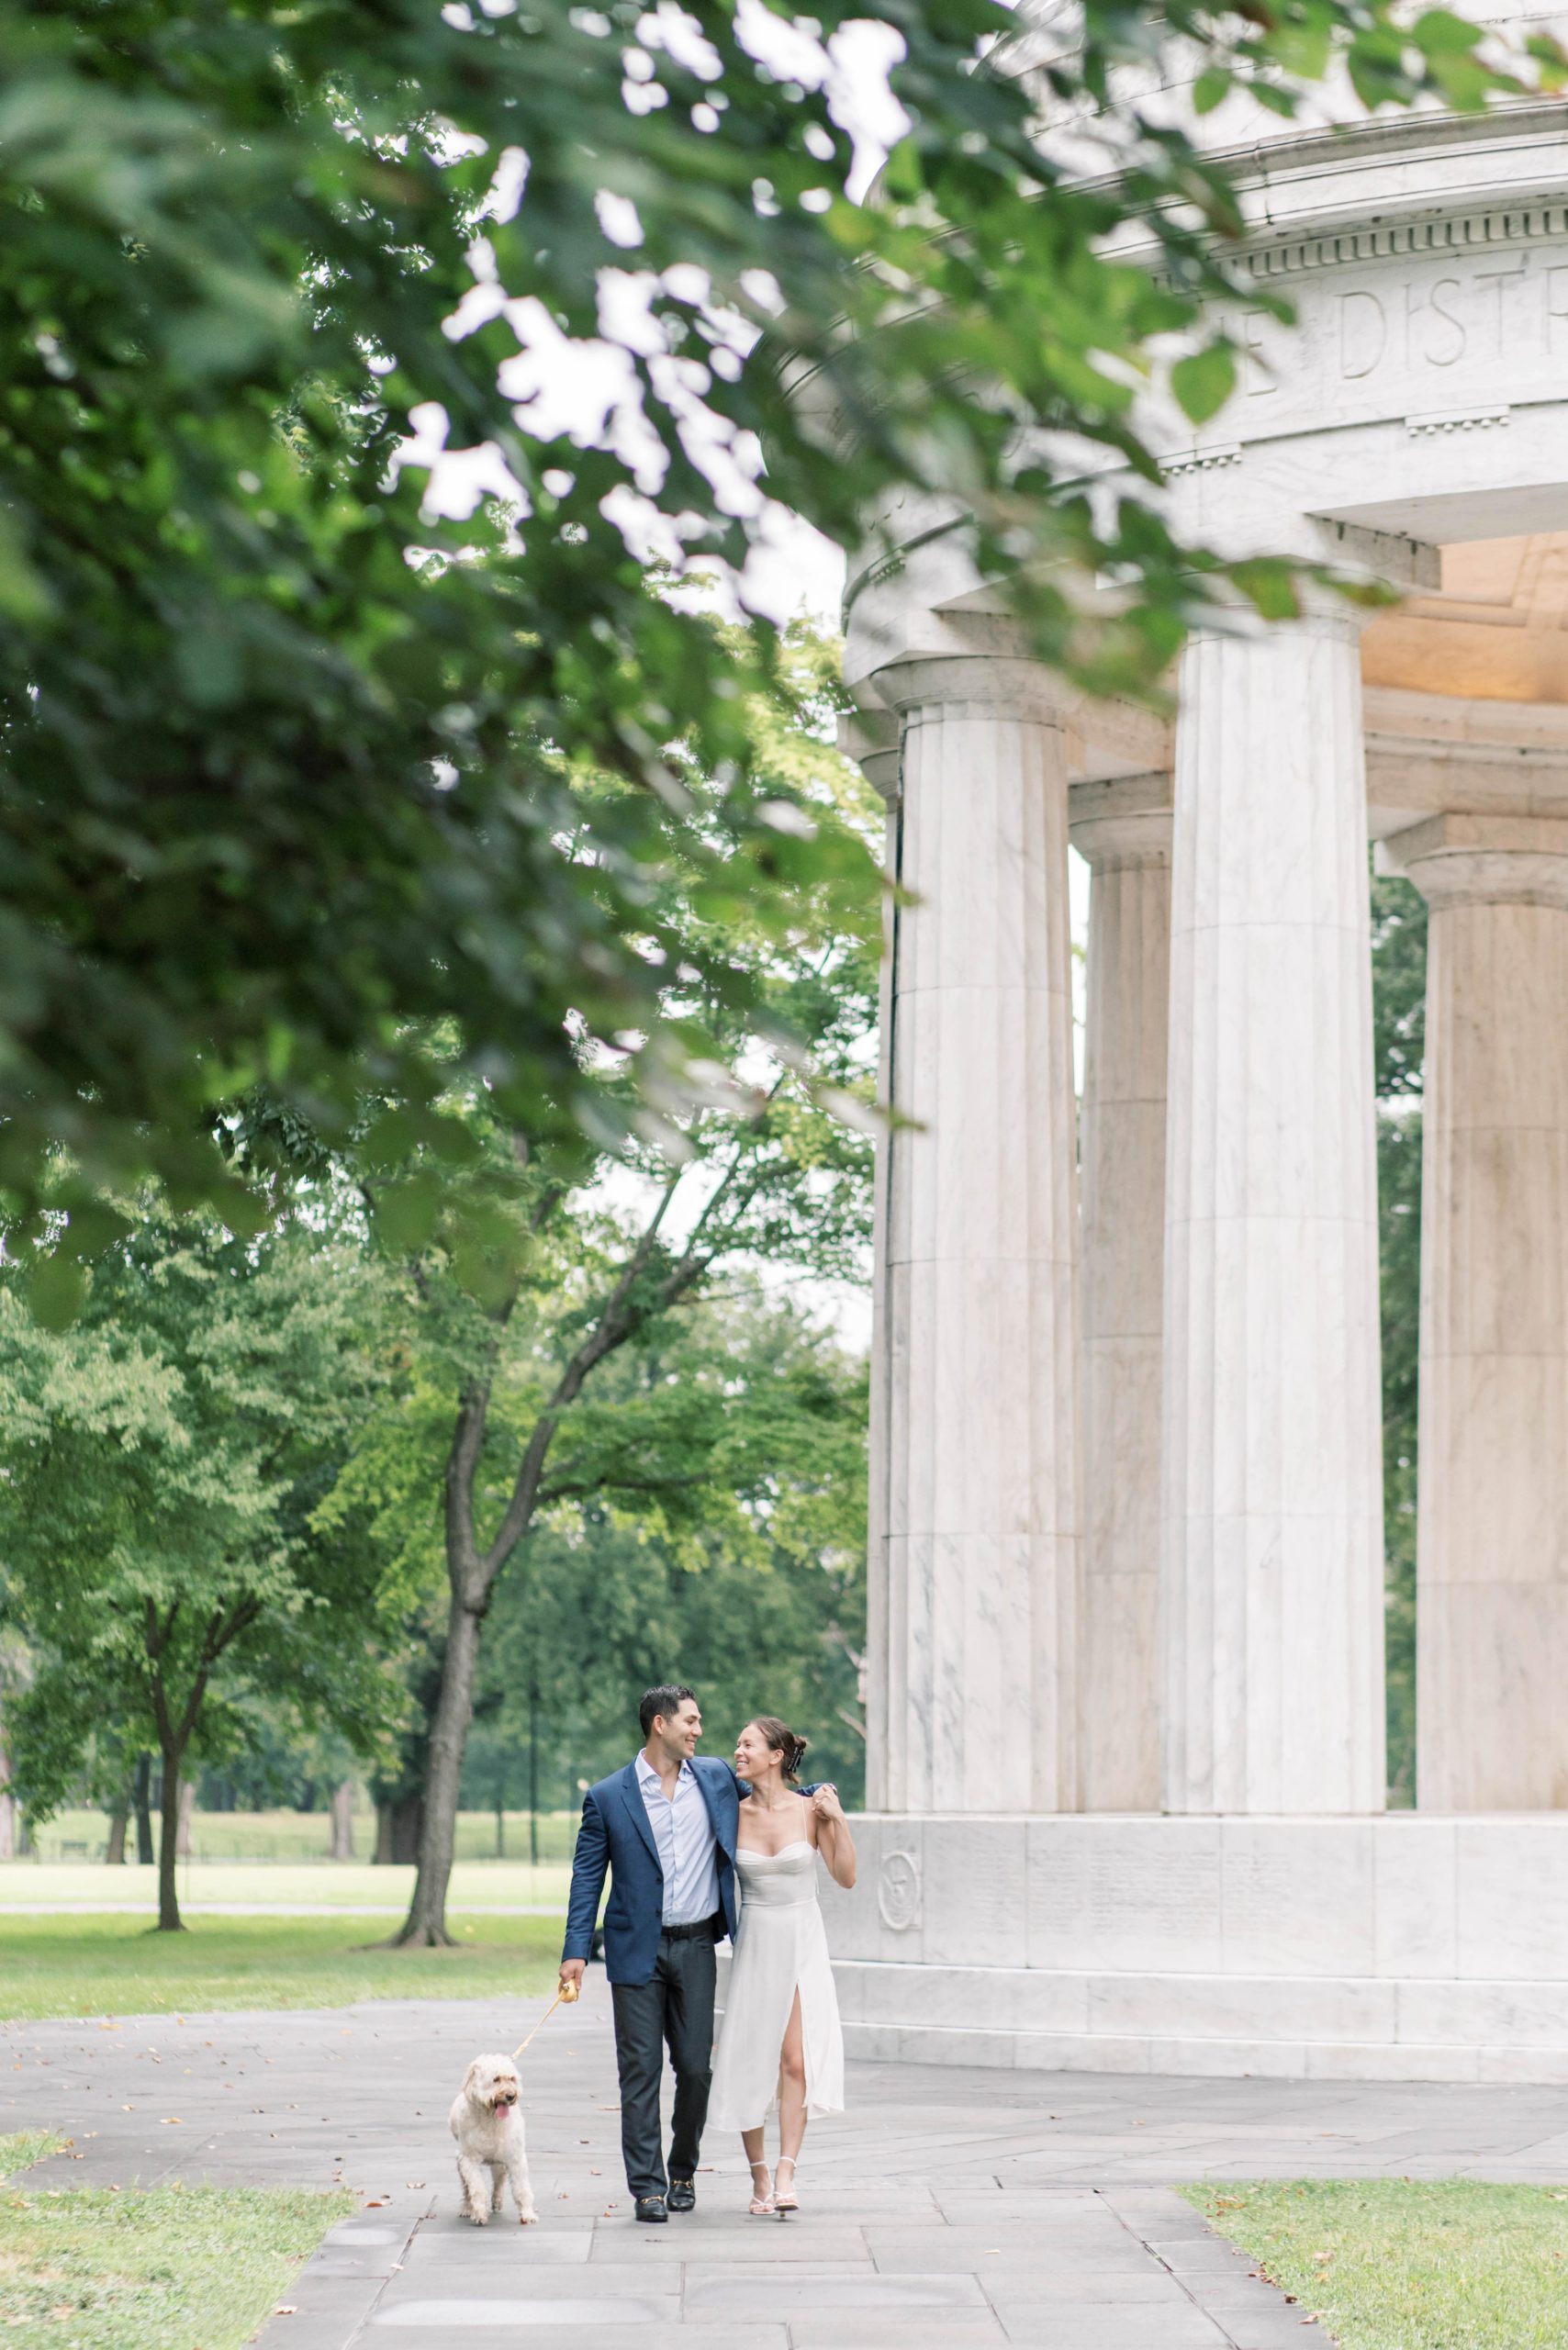 An stylish sunrise engagement session at the Lincoln Memorial on an overcast morning in Washington, DC.